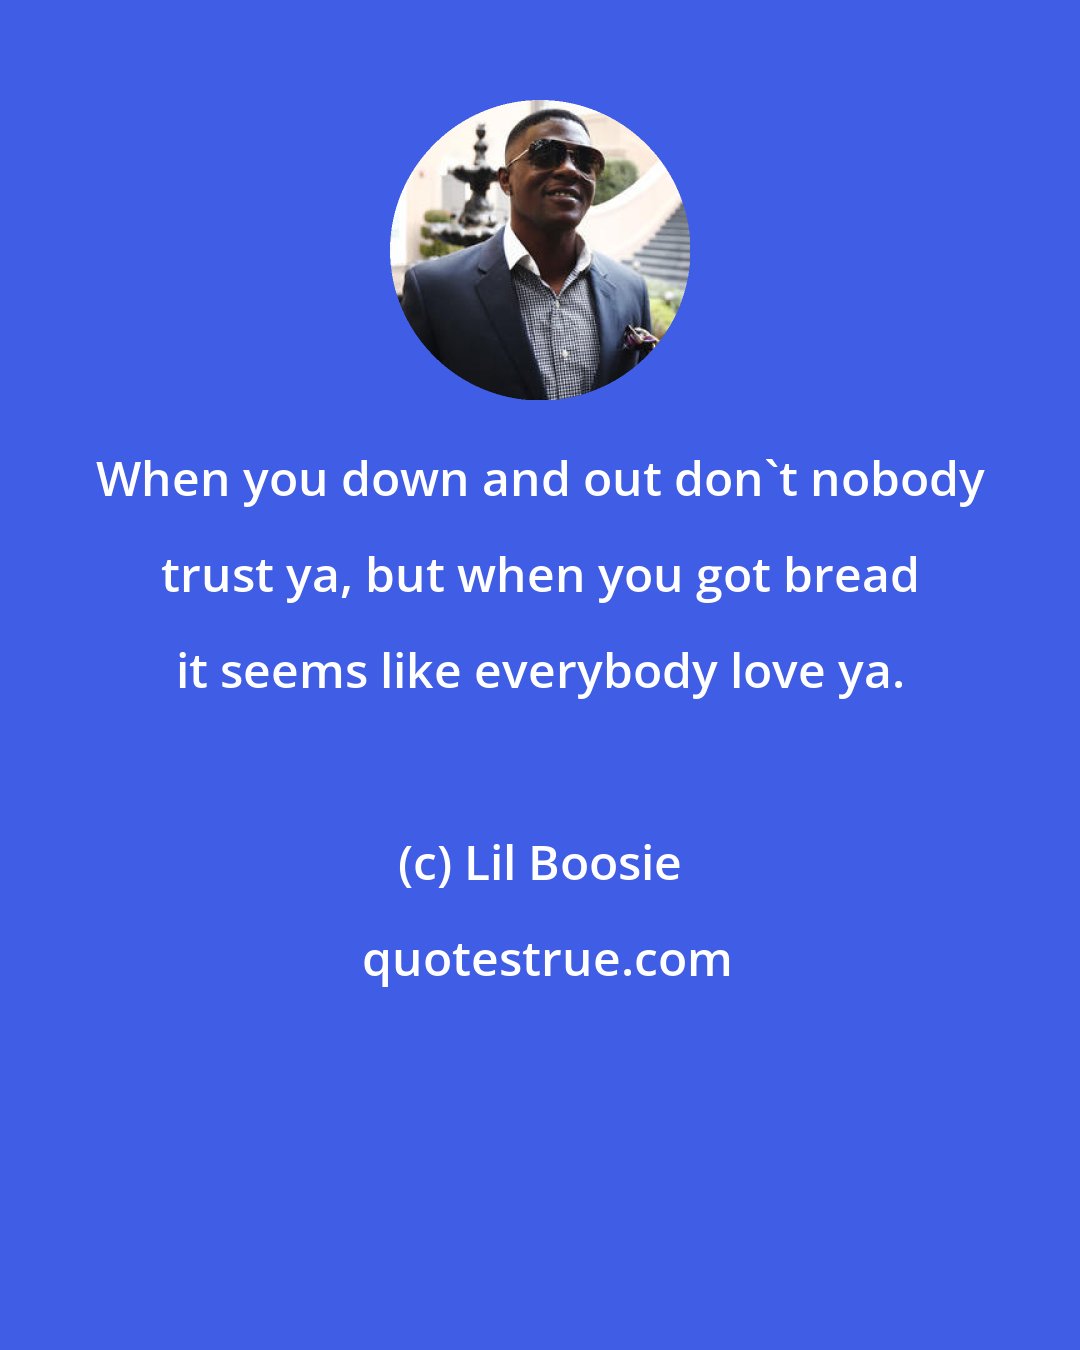 Lil Boosie: When you down and out don't nobody trust ya, but when you got bread it seems like everybody love ya.